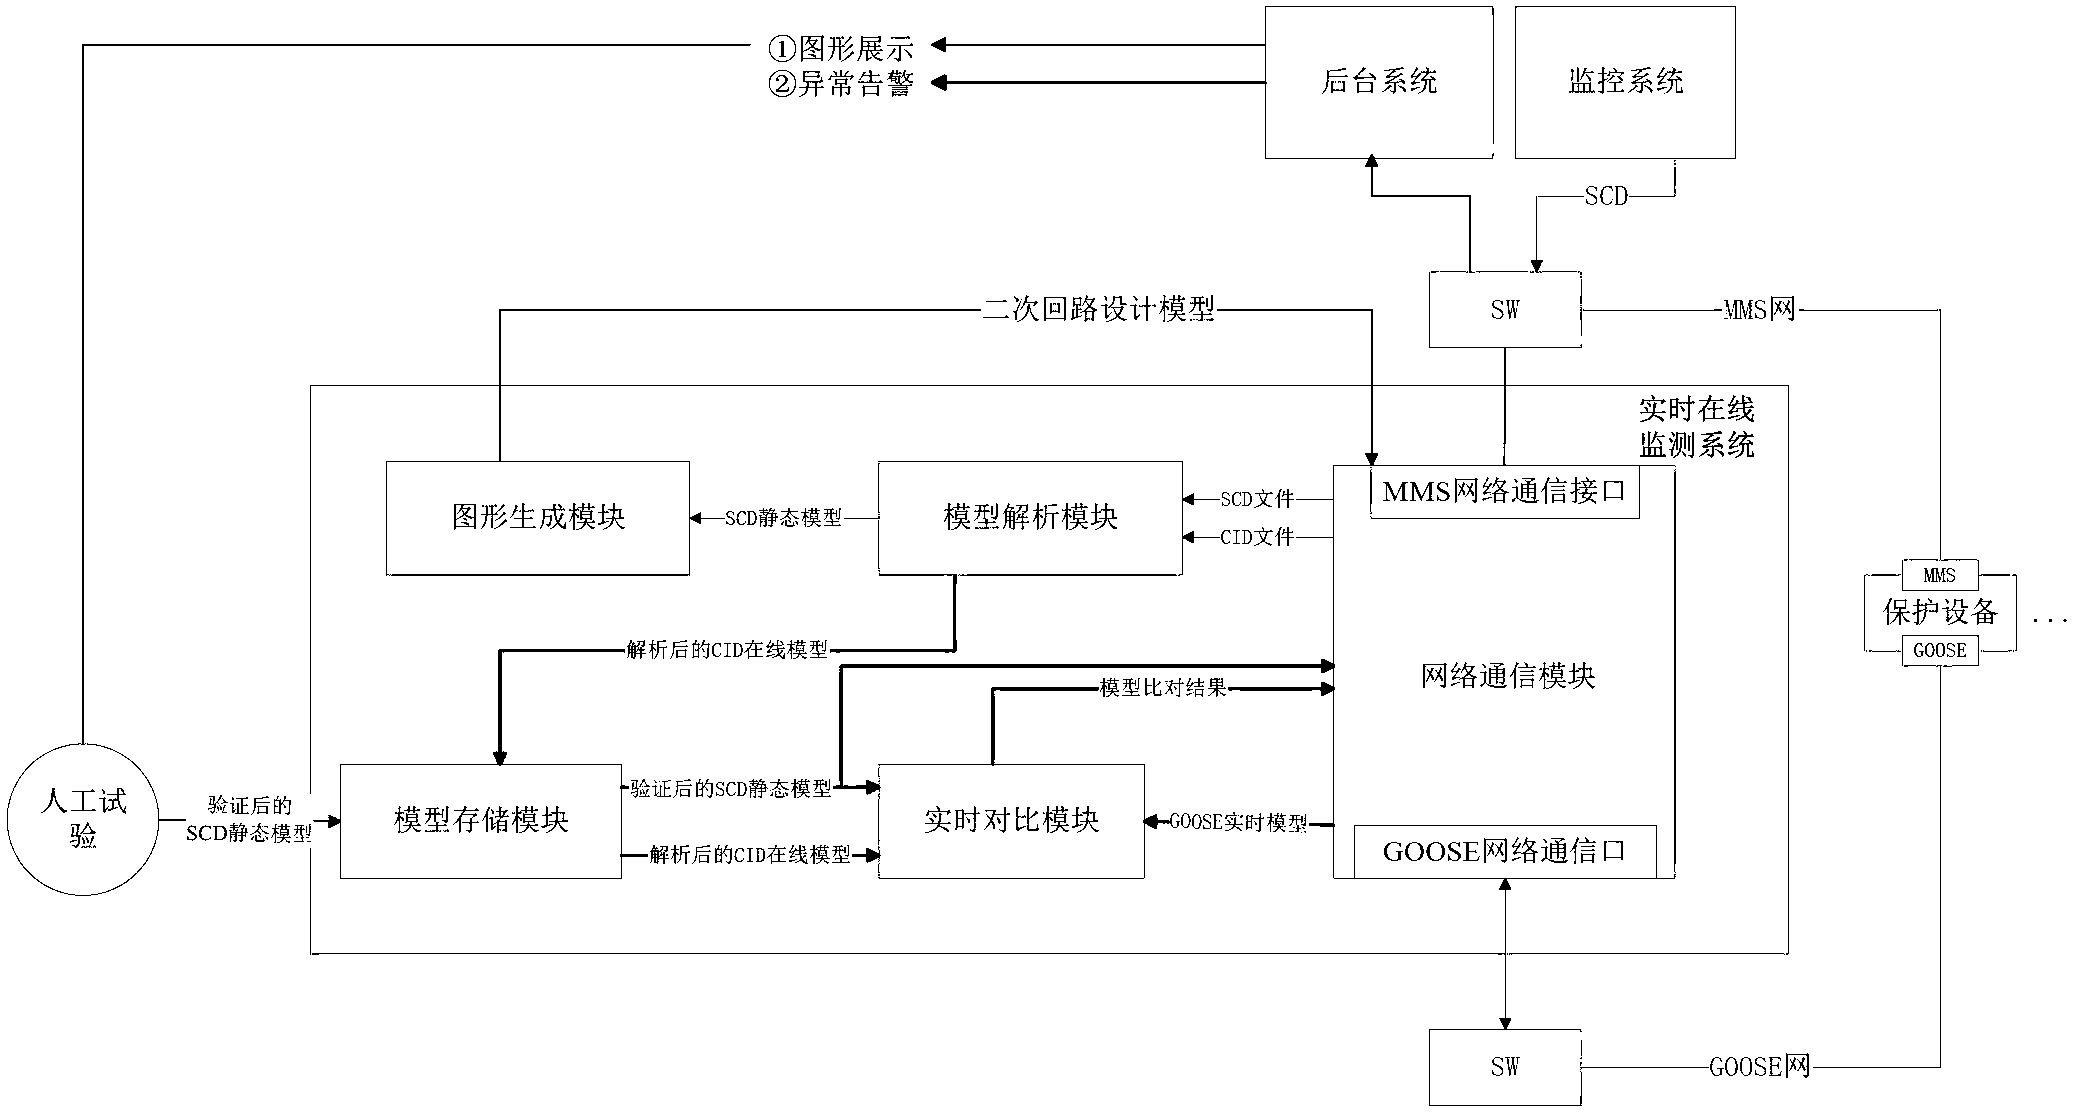 System for monitoring secondary circuit model on line in real time based on protection device